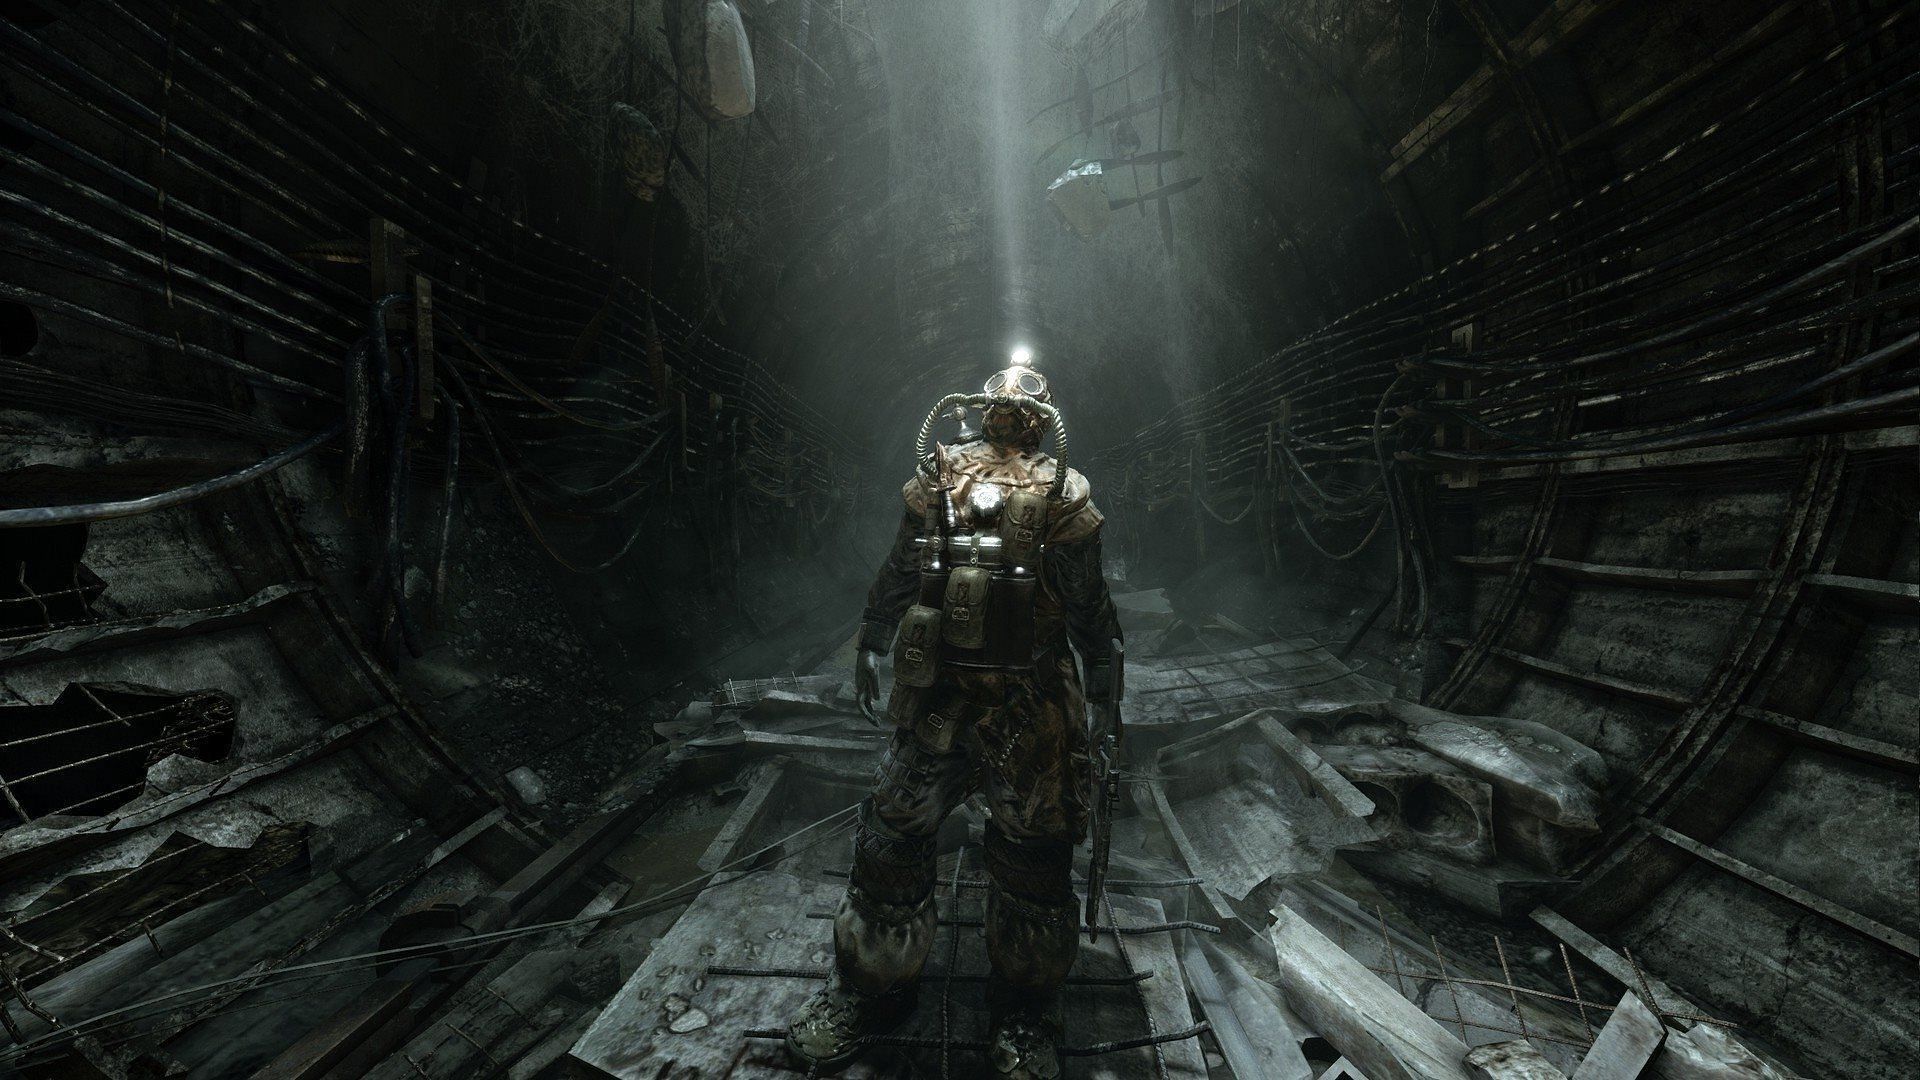 Metro: Last Light Redux is free to claim on the Epic Games Store today -  Neowin